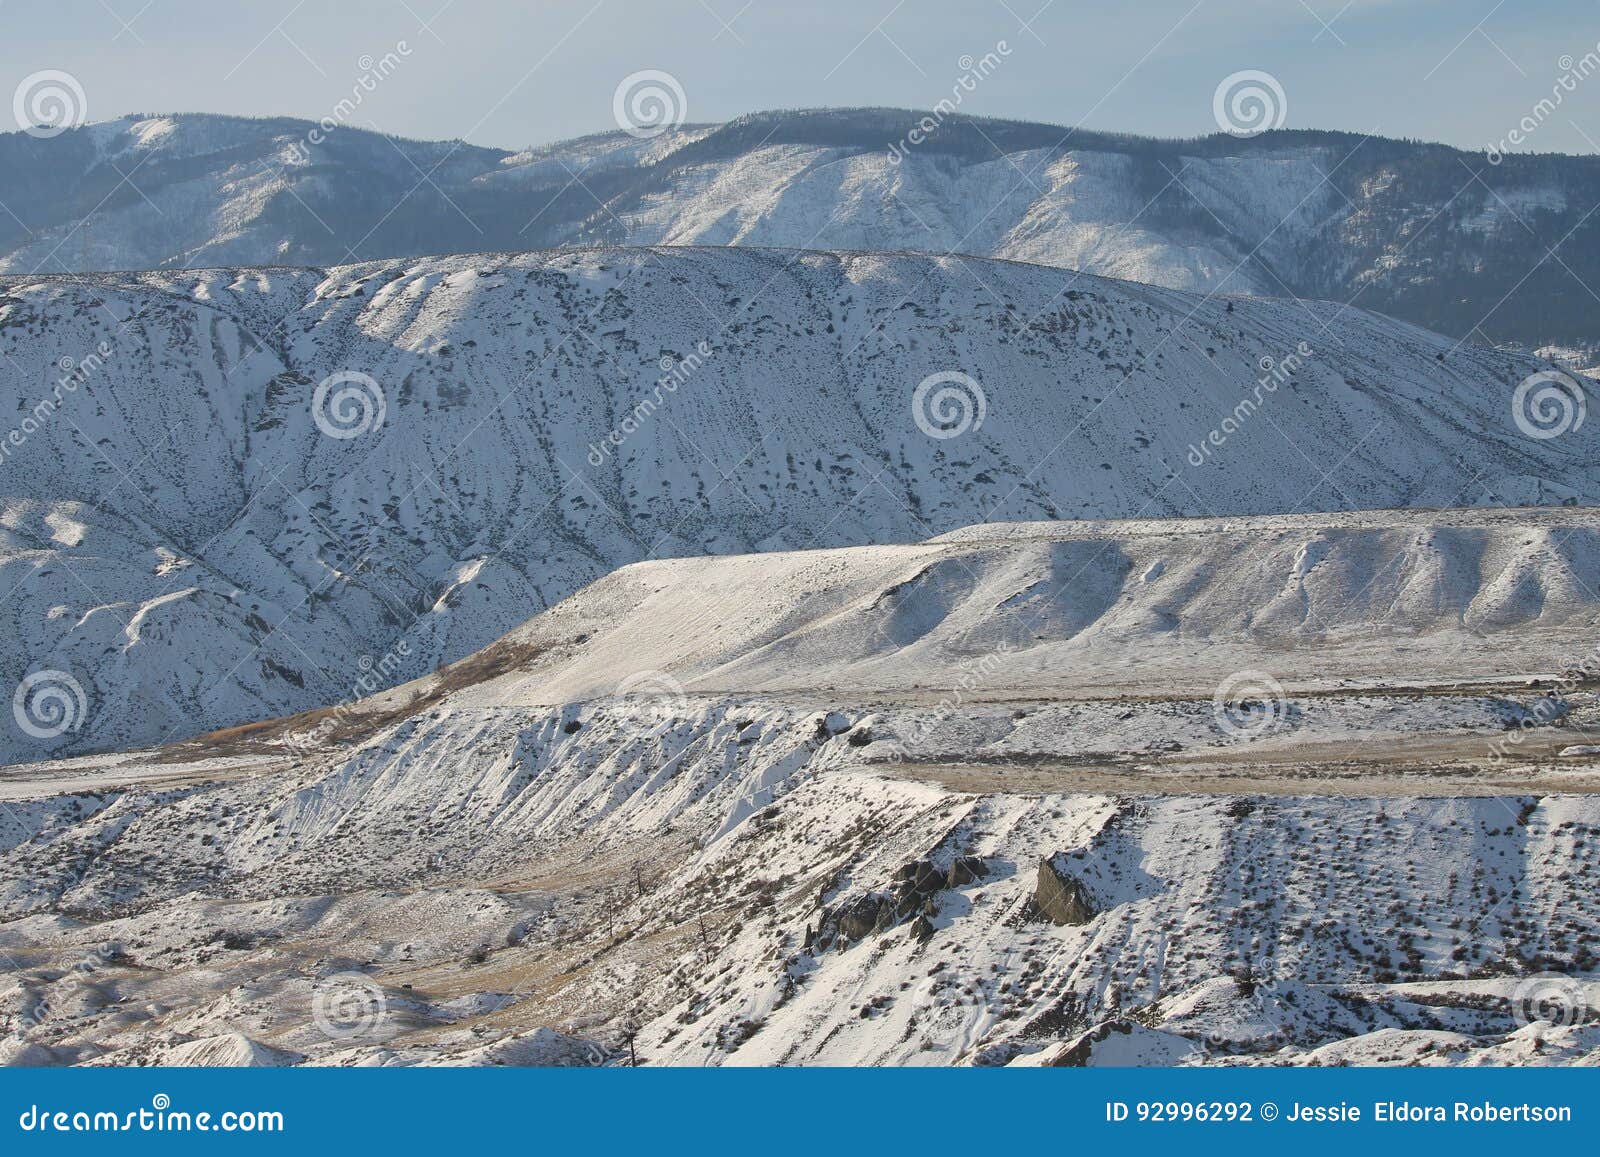 snowy hill plateaus